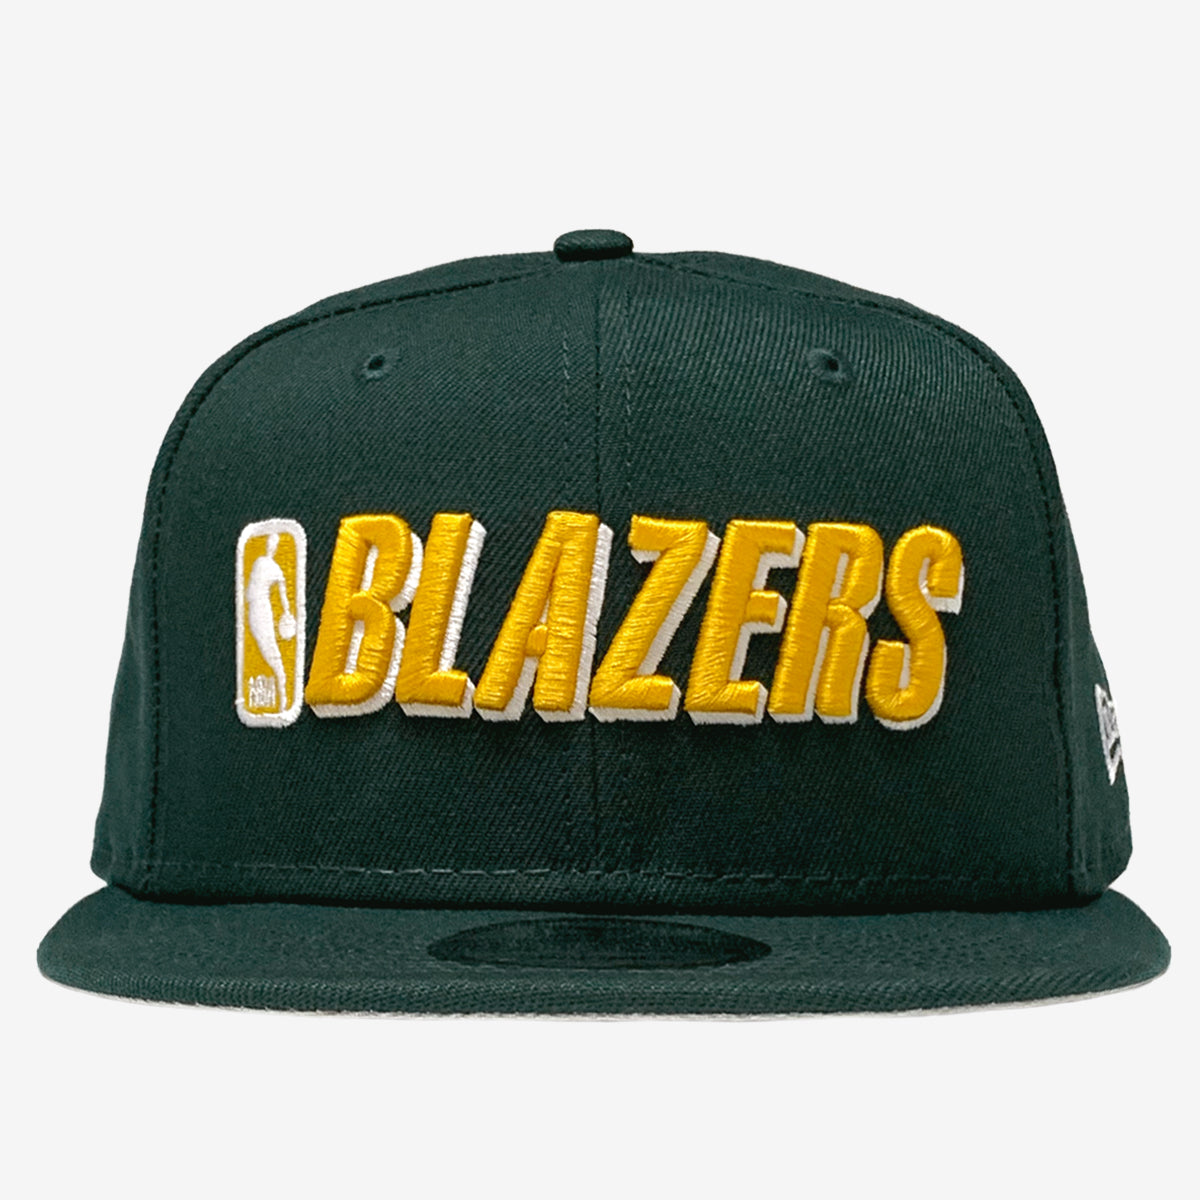 Green cap with embroidered gold BLAZERS and NBA  logo on the crown. 